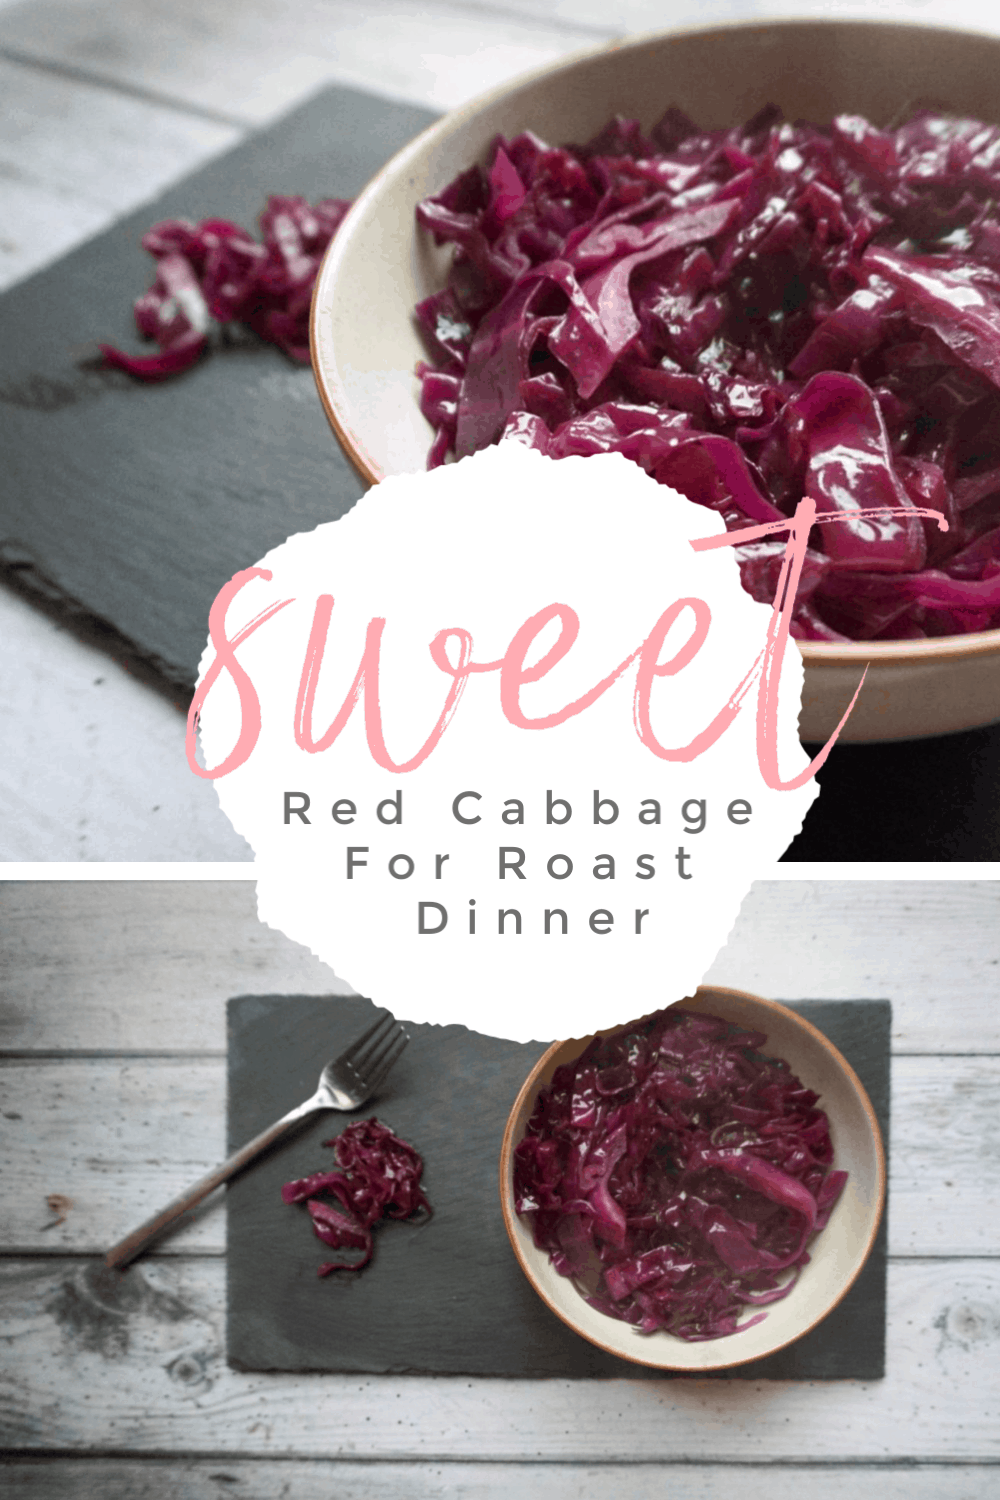 How To Make Red Cabbage For Roast Dinner #Sweetredcabbage #vegetablesforroastdinner #redcabbage #Roastdinner